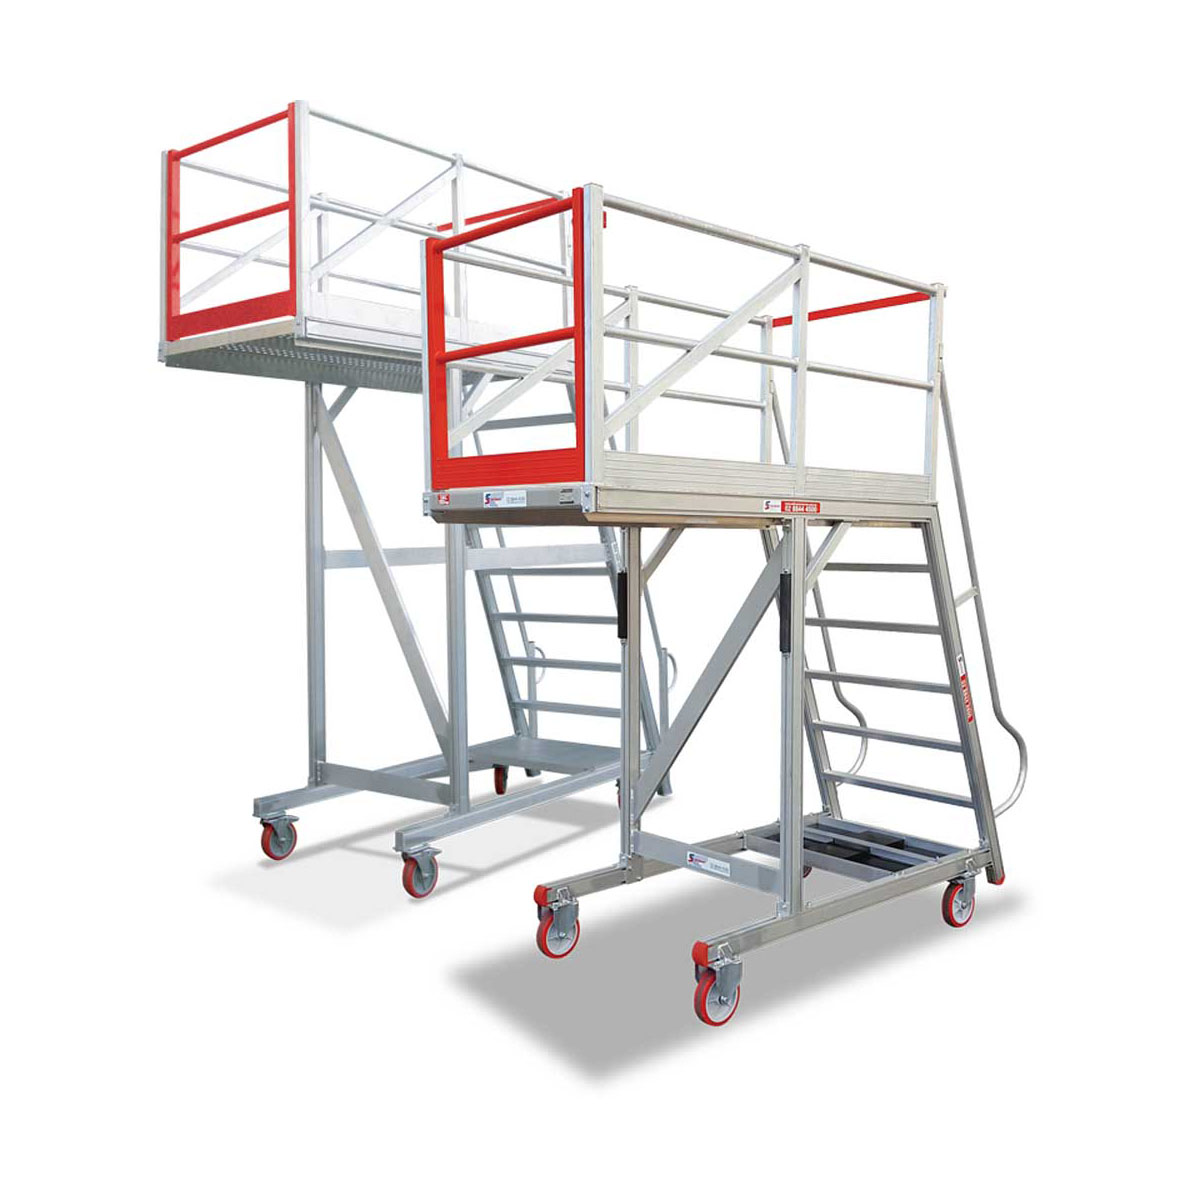 Buy Maintenance Work Platforms - Cantilever  in Work Platforms from Warthog available at Astrolift NZ